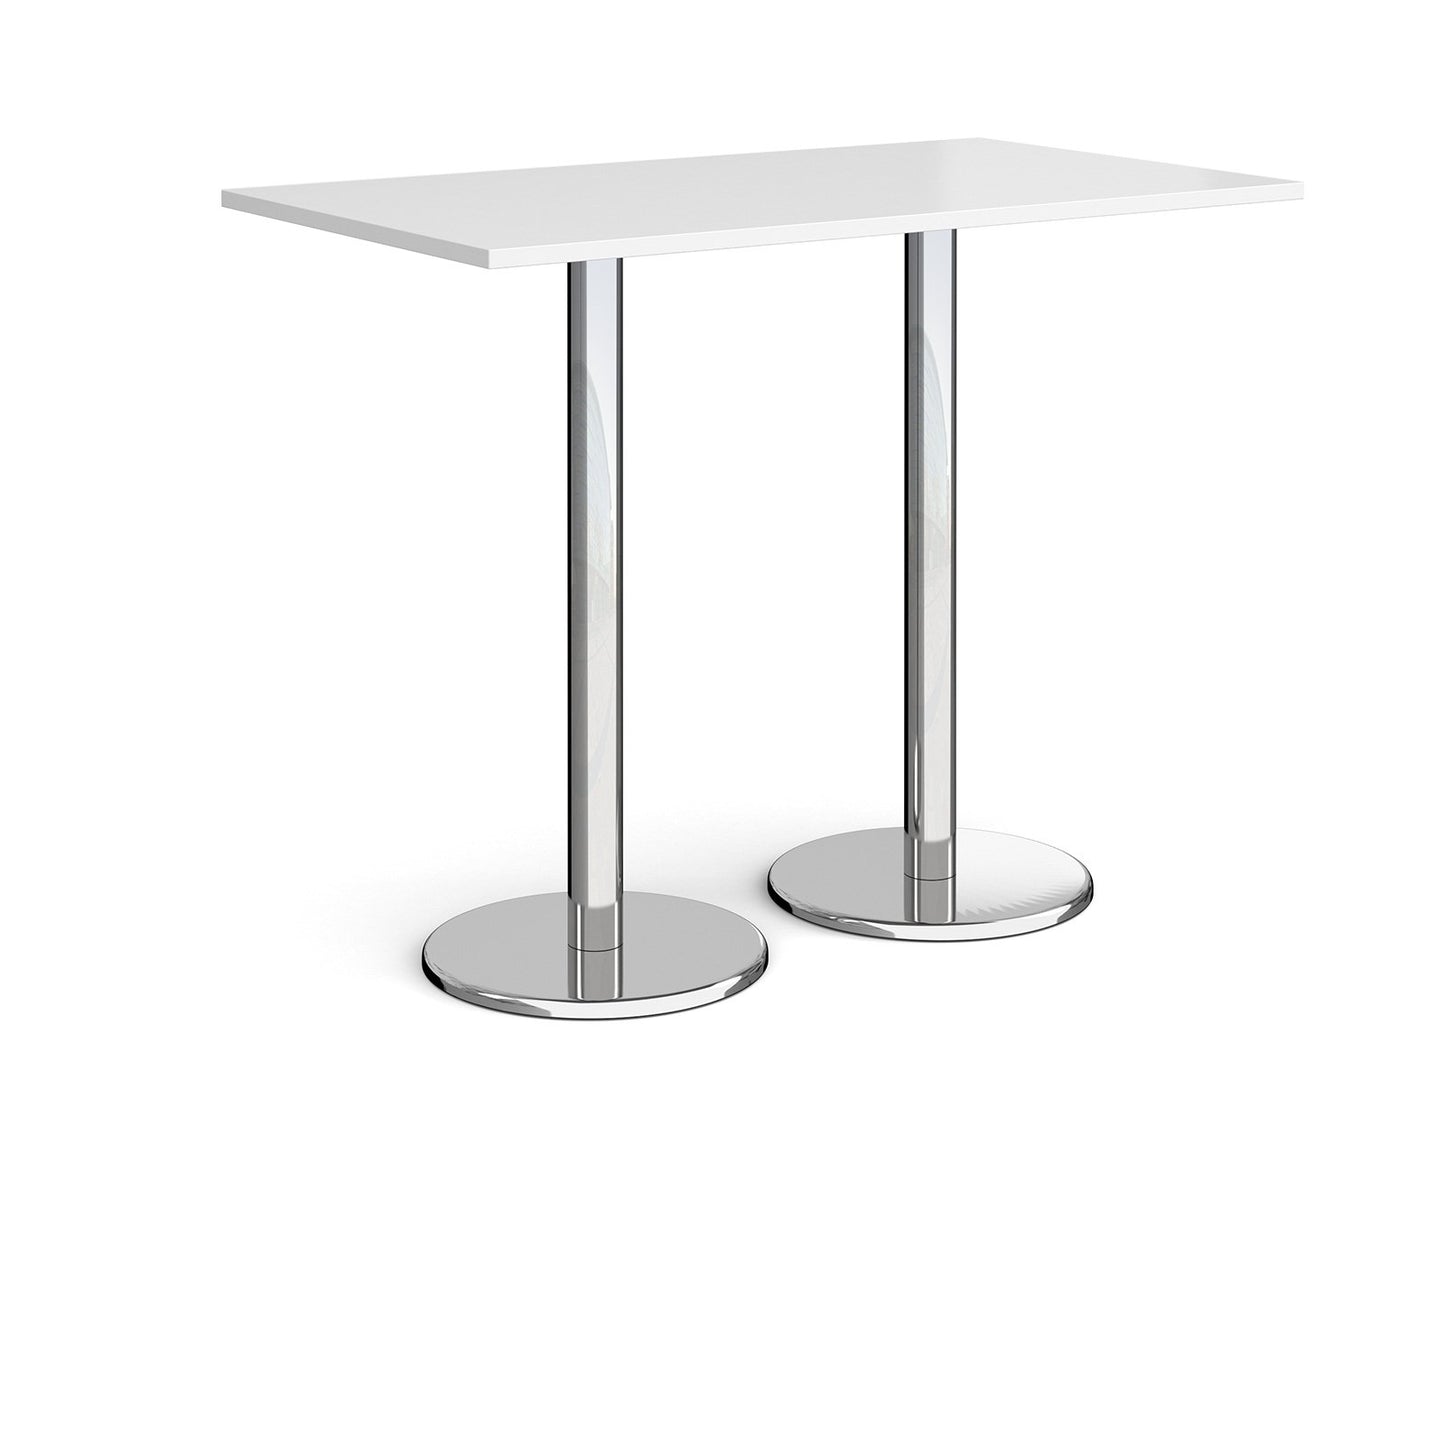 Pisa rectangular poseur table with round bases